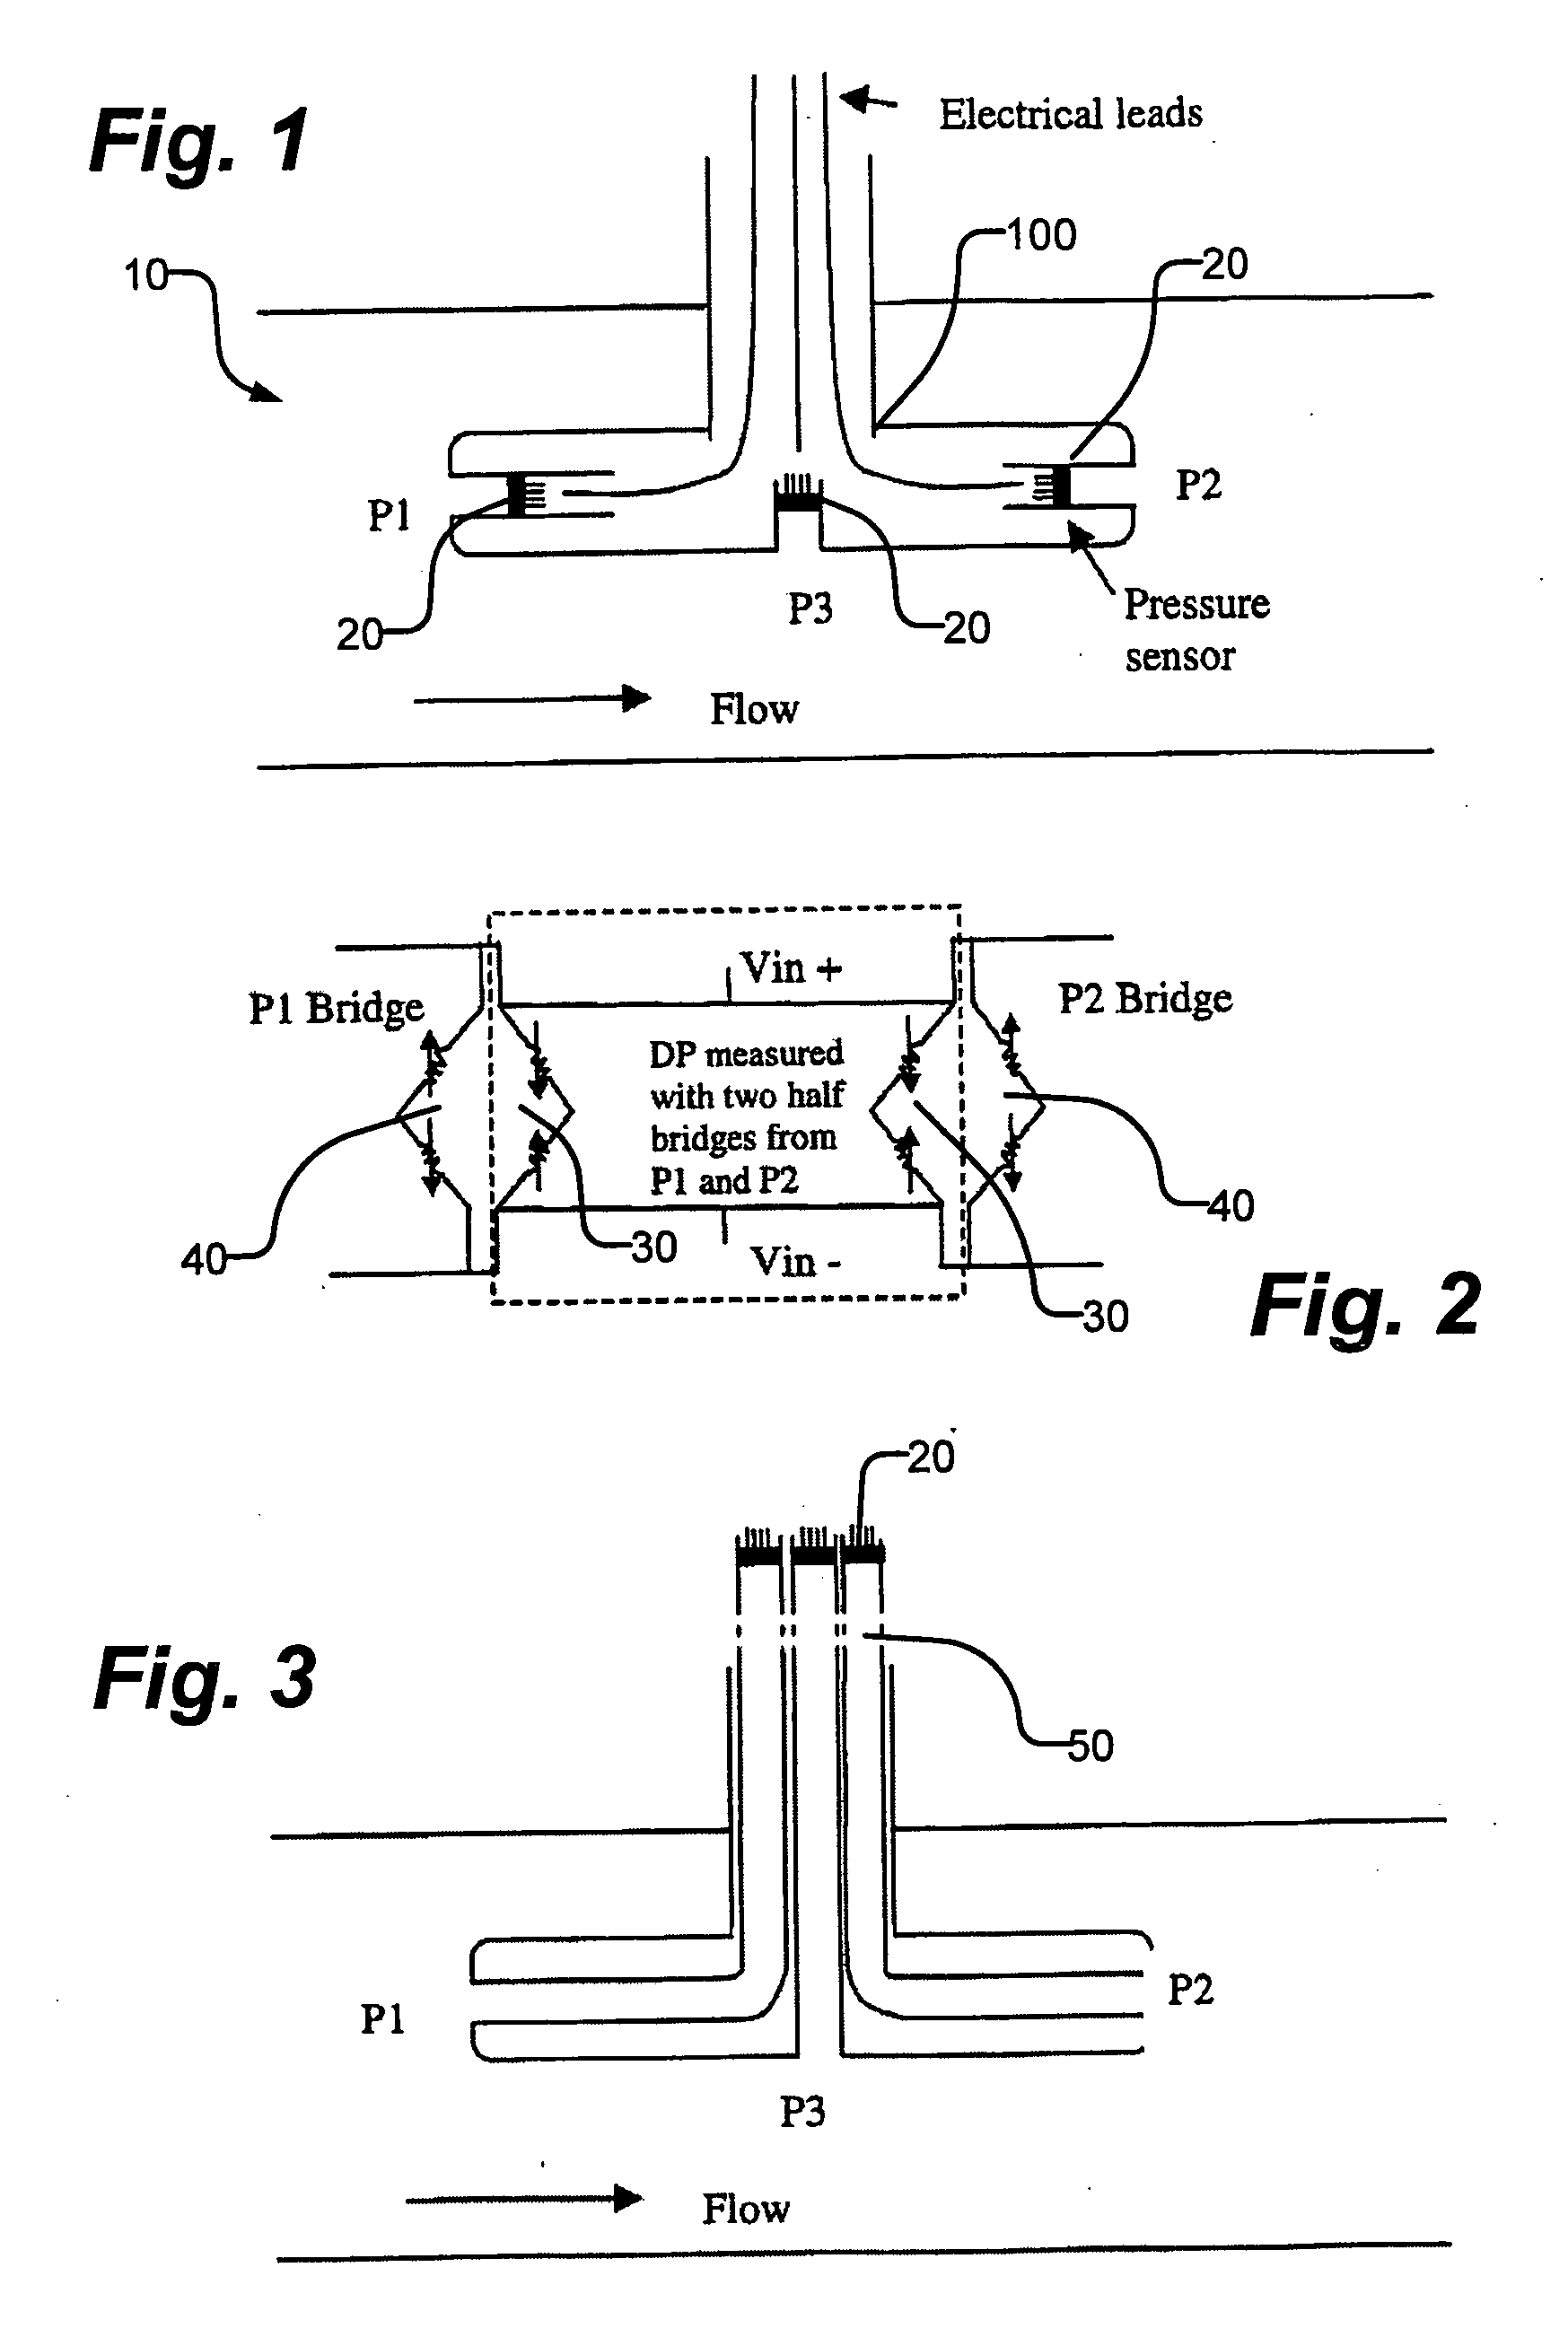 System and method for determining flow characteristics